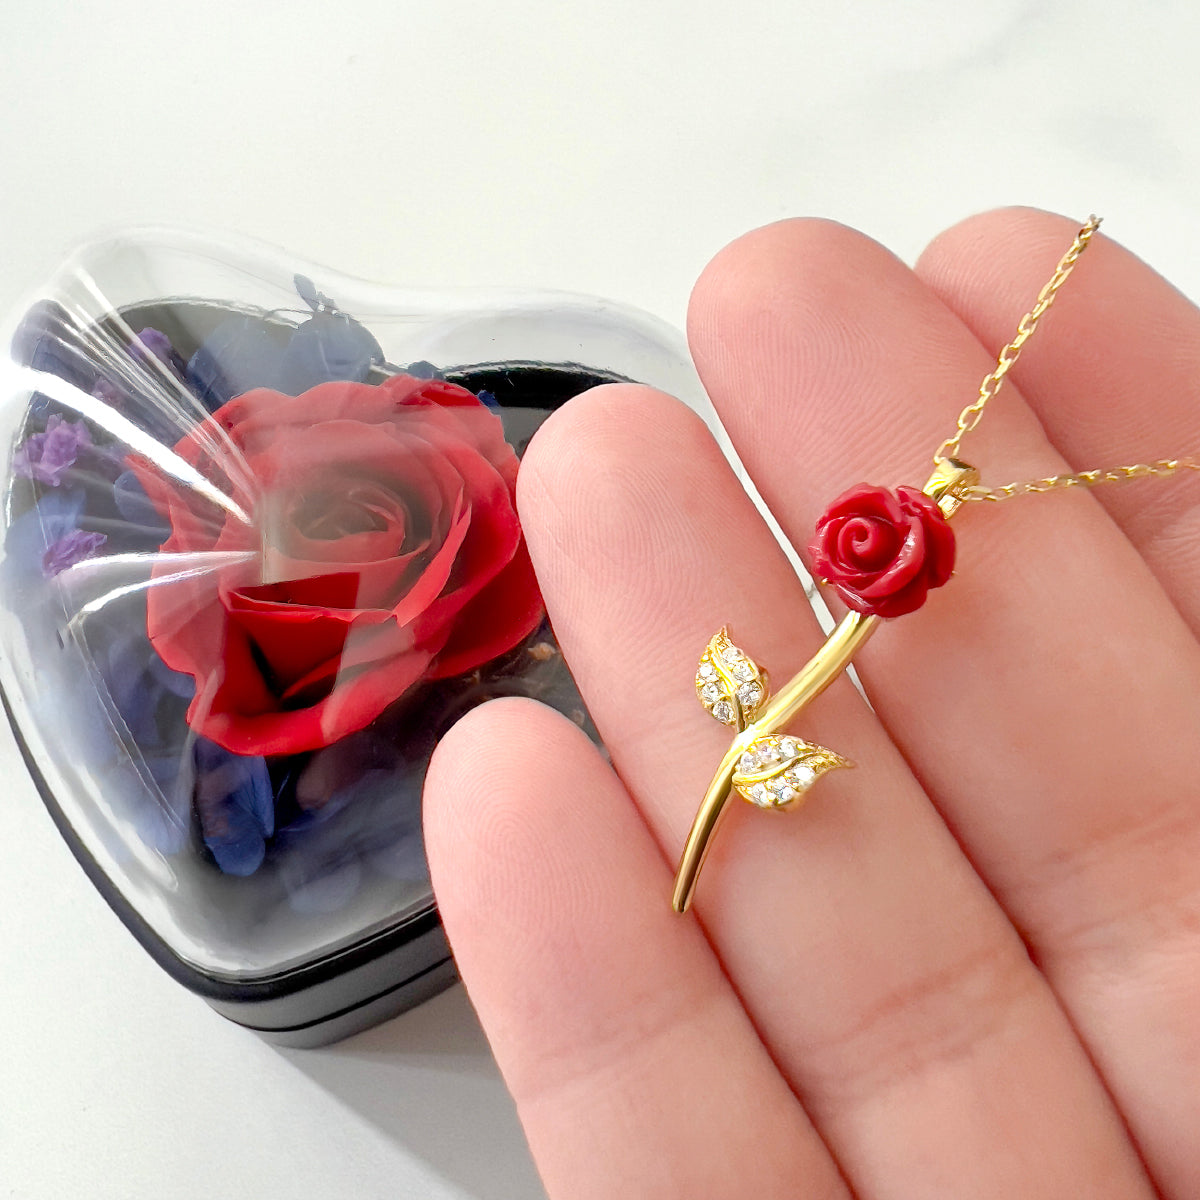 3 Sets of Everlasting Love - Red Rose Necklace with Rose Box Gift Set